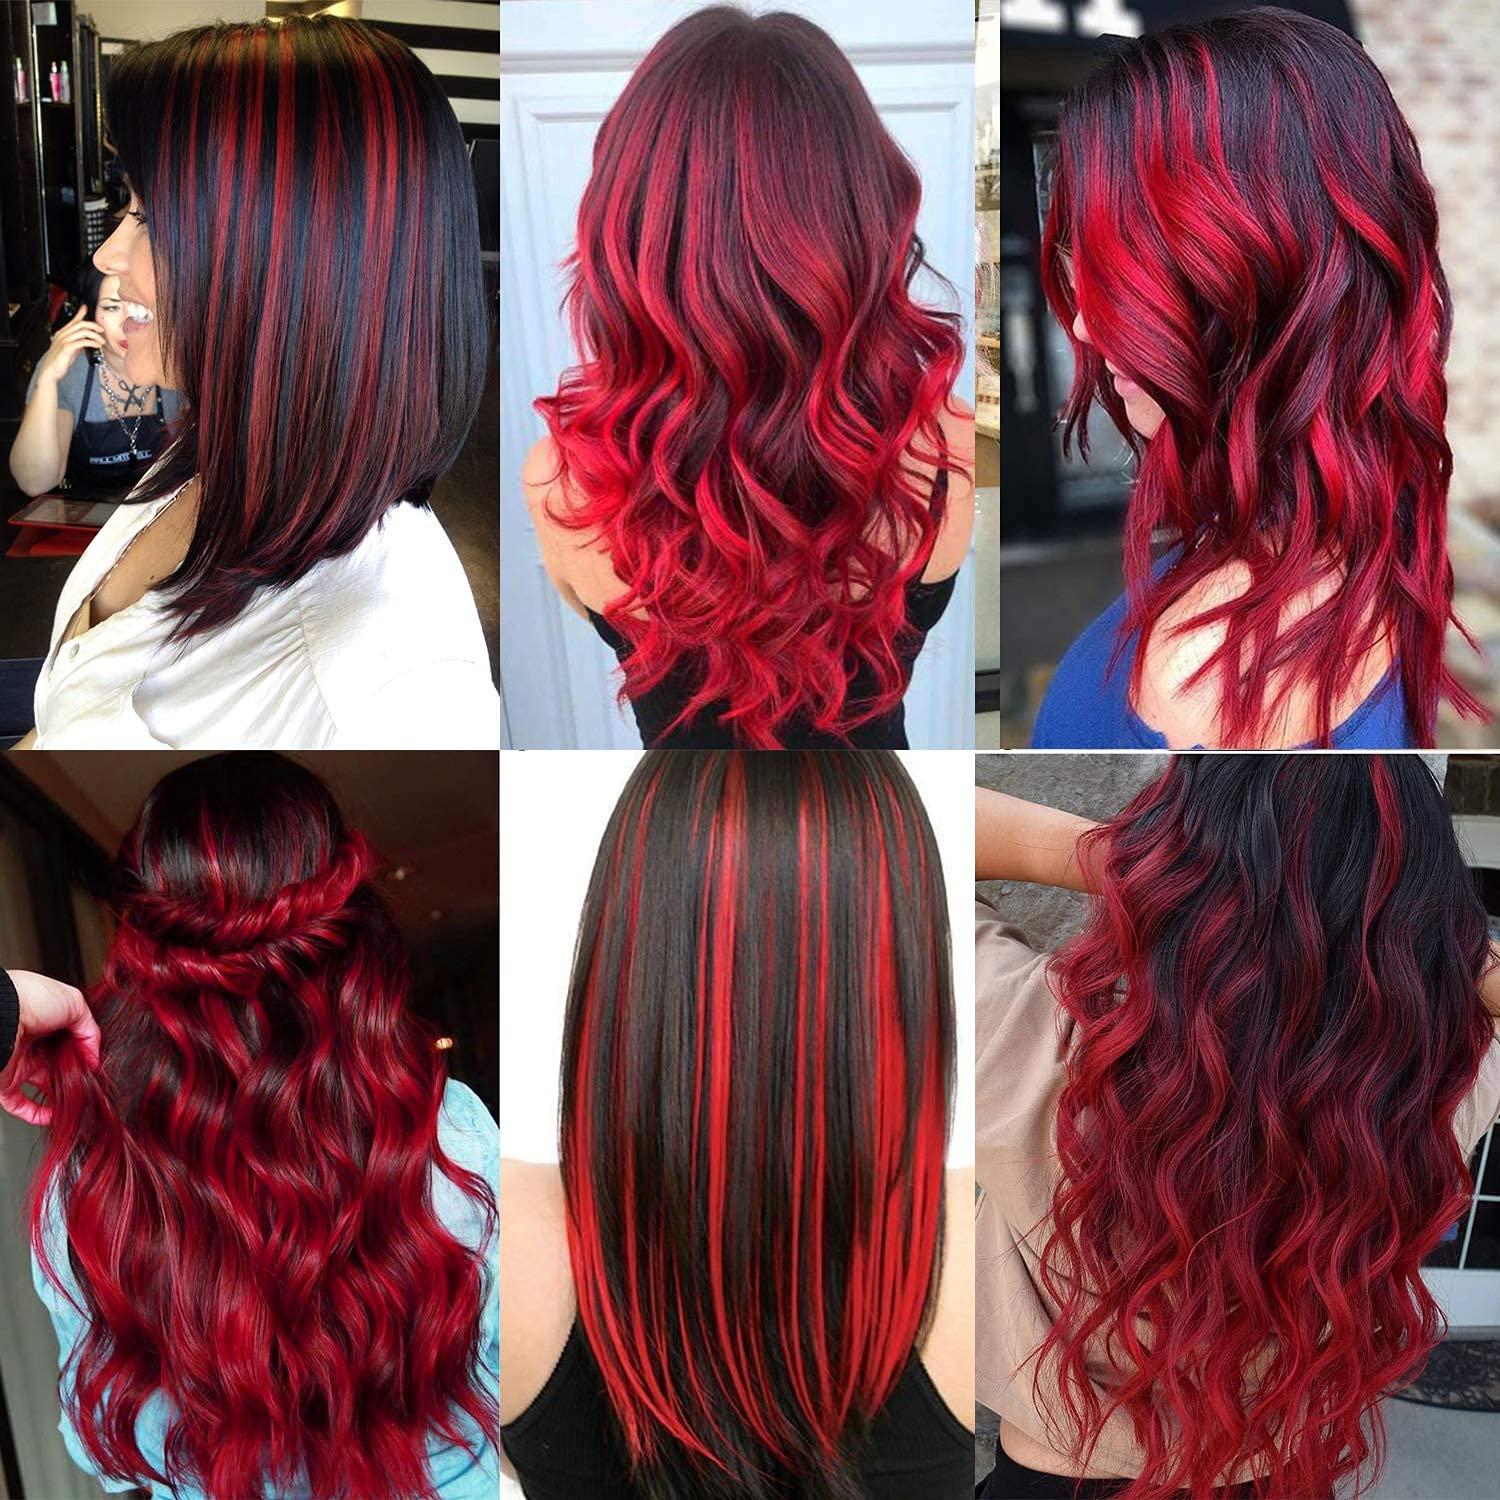 TOFAFA 22 inch Colored Hair Extensions straight Hairpiece Multi-colors  Party Highlights Clip in Synthetic Hair Extensions (10 PCS Red) 10 PCS-Red